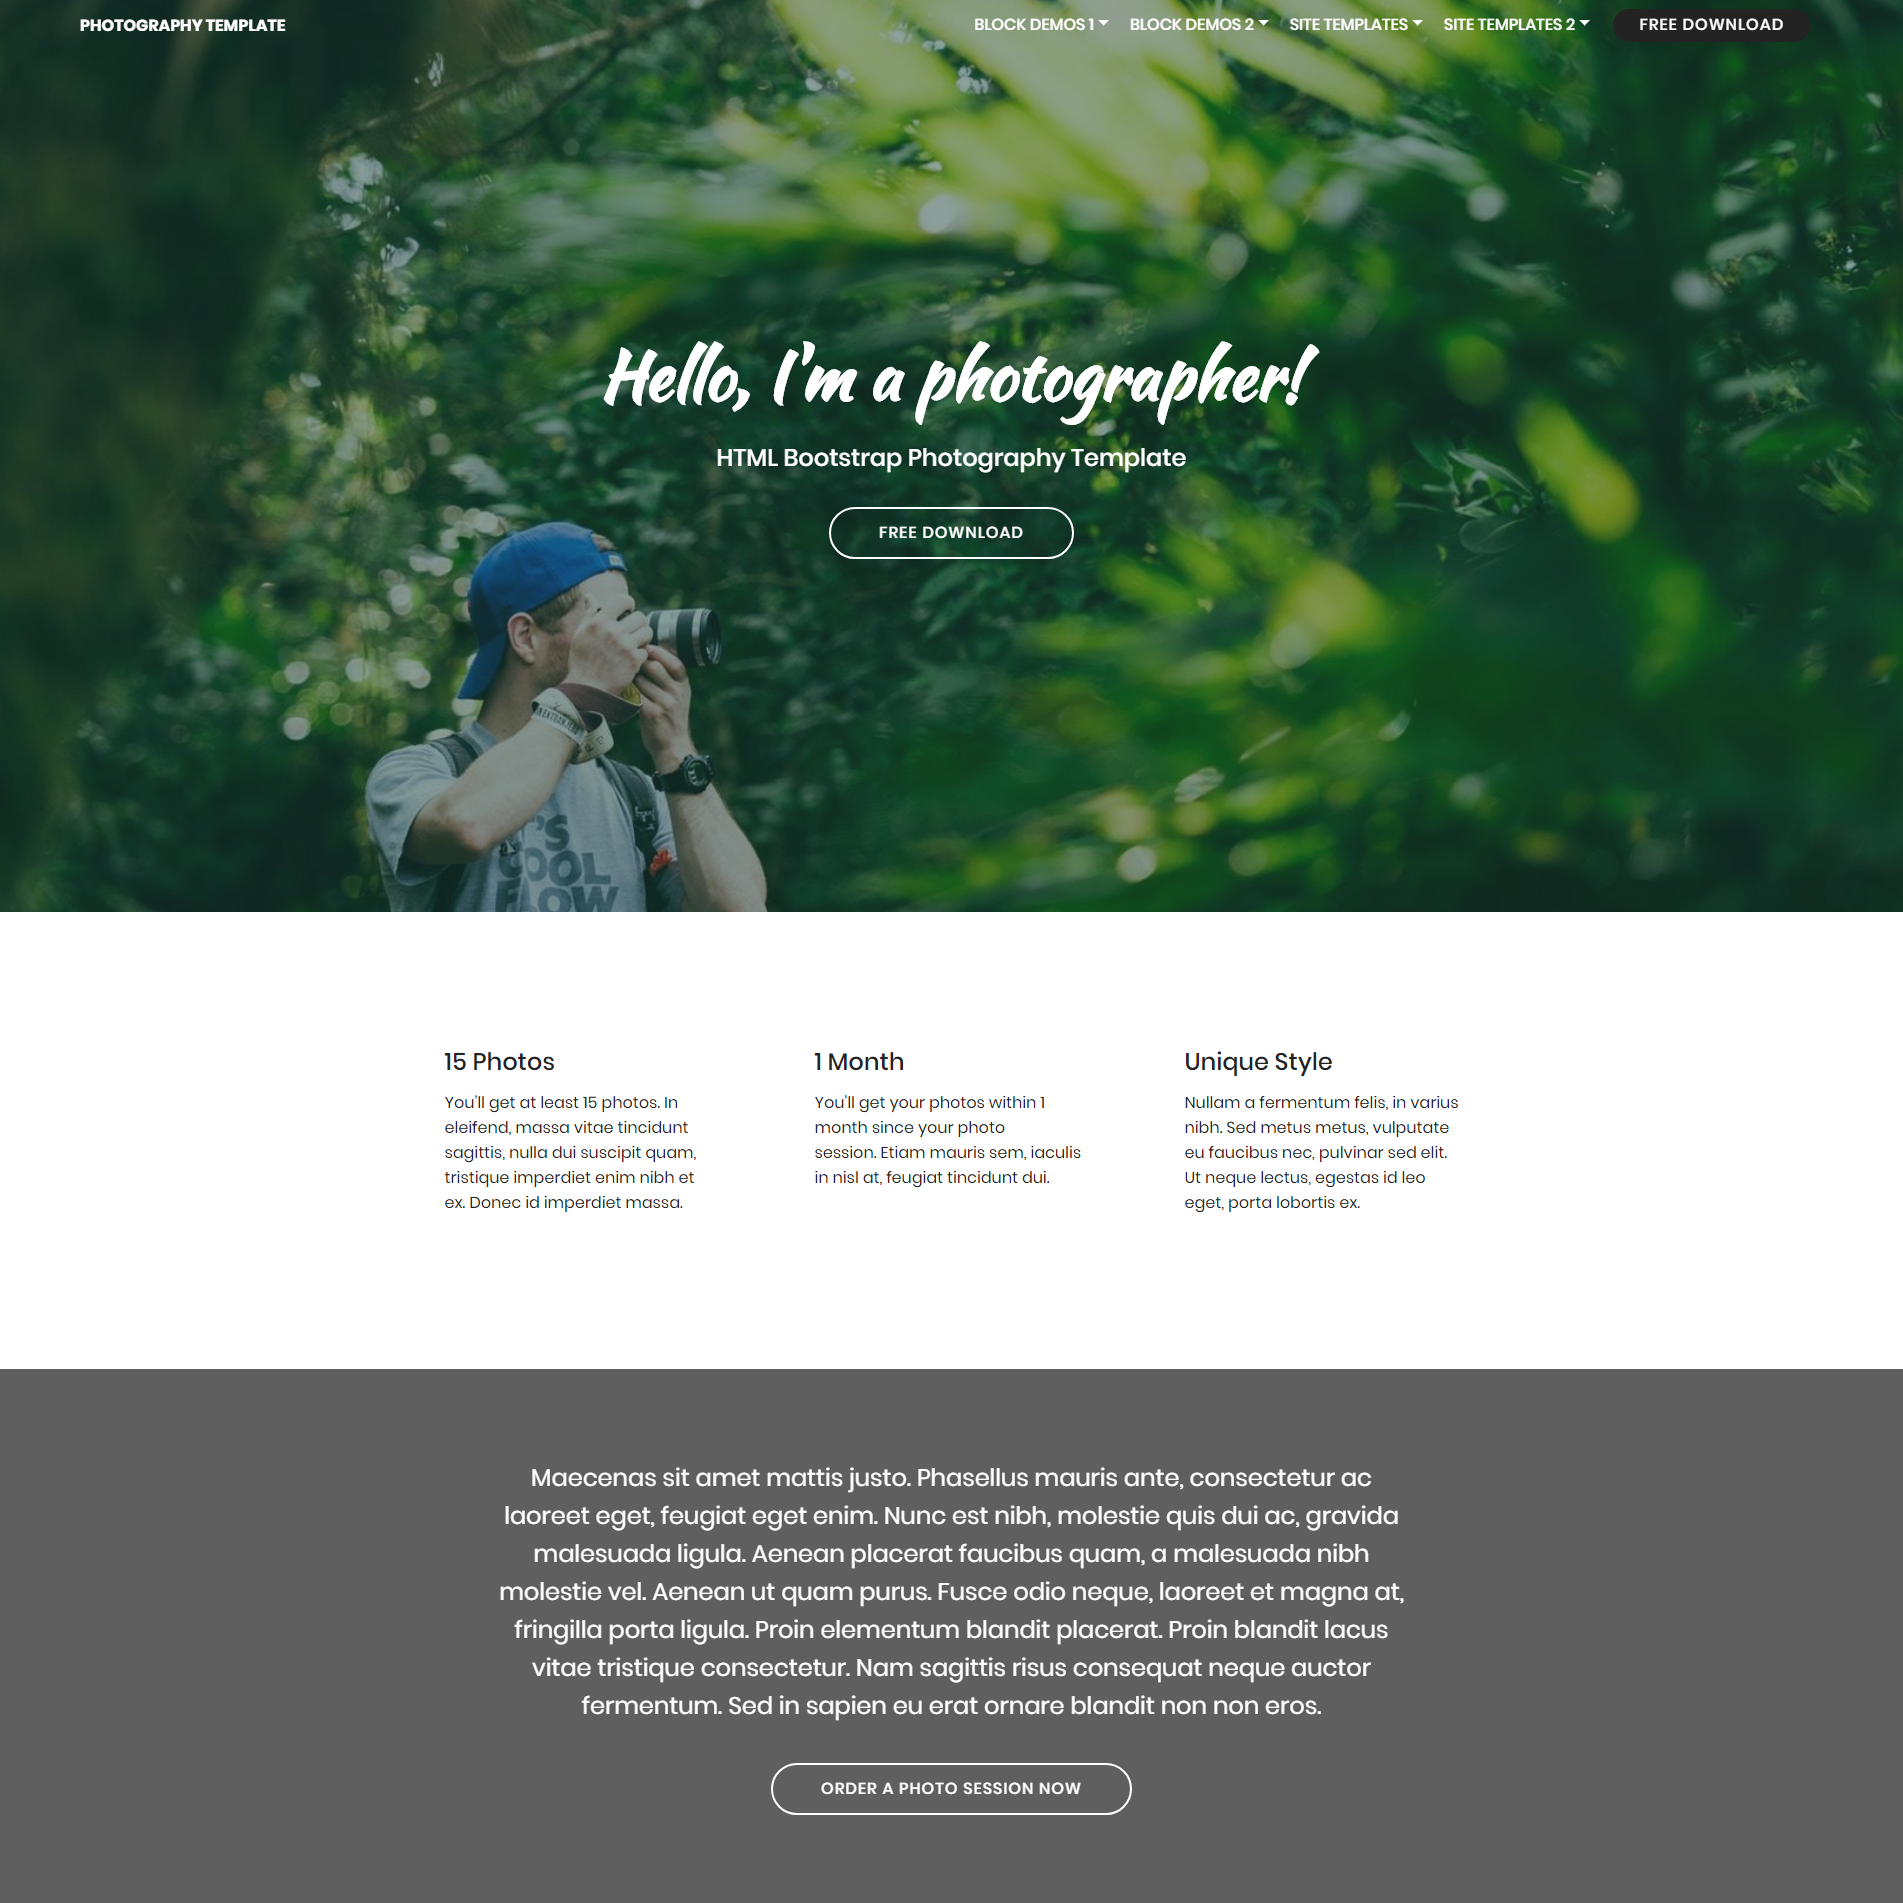 HTML Bootstrap Photography Themes